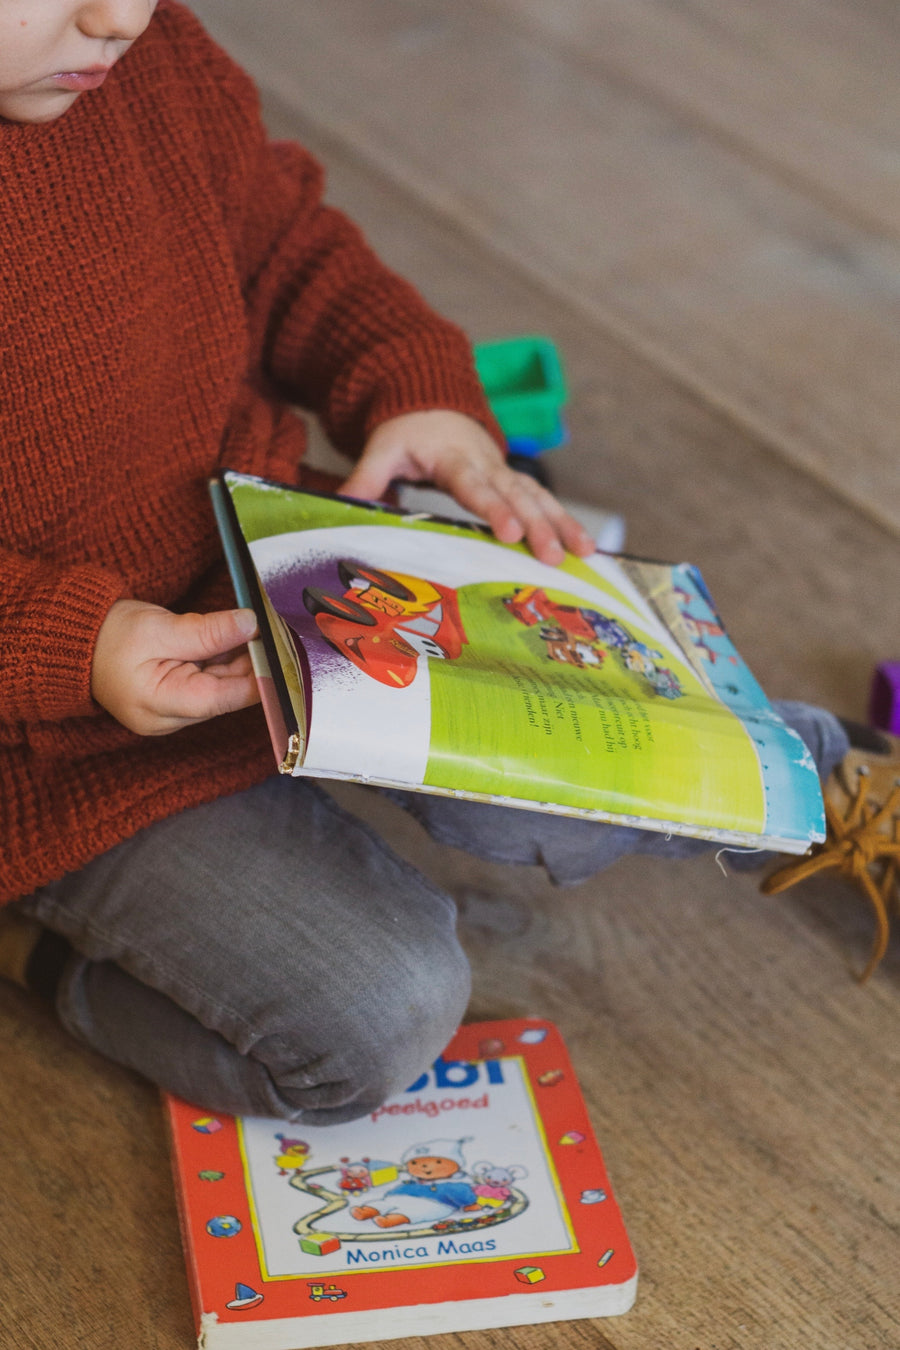 Vehicle Books for Kids: Fun and Educational Reads for Your Little Car Lover